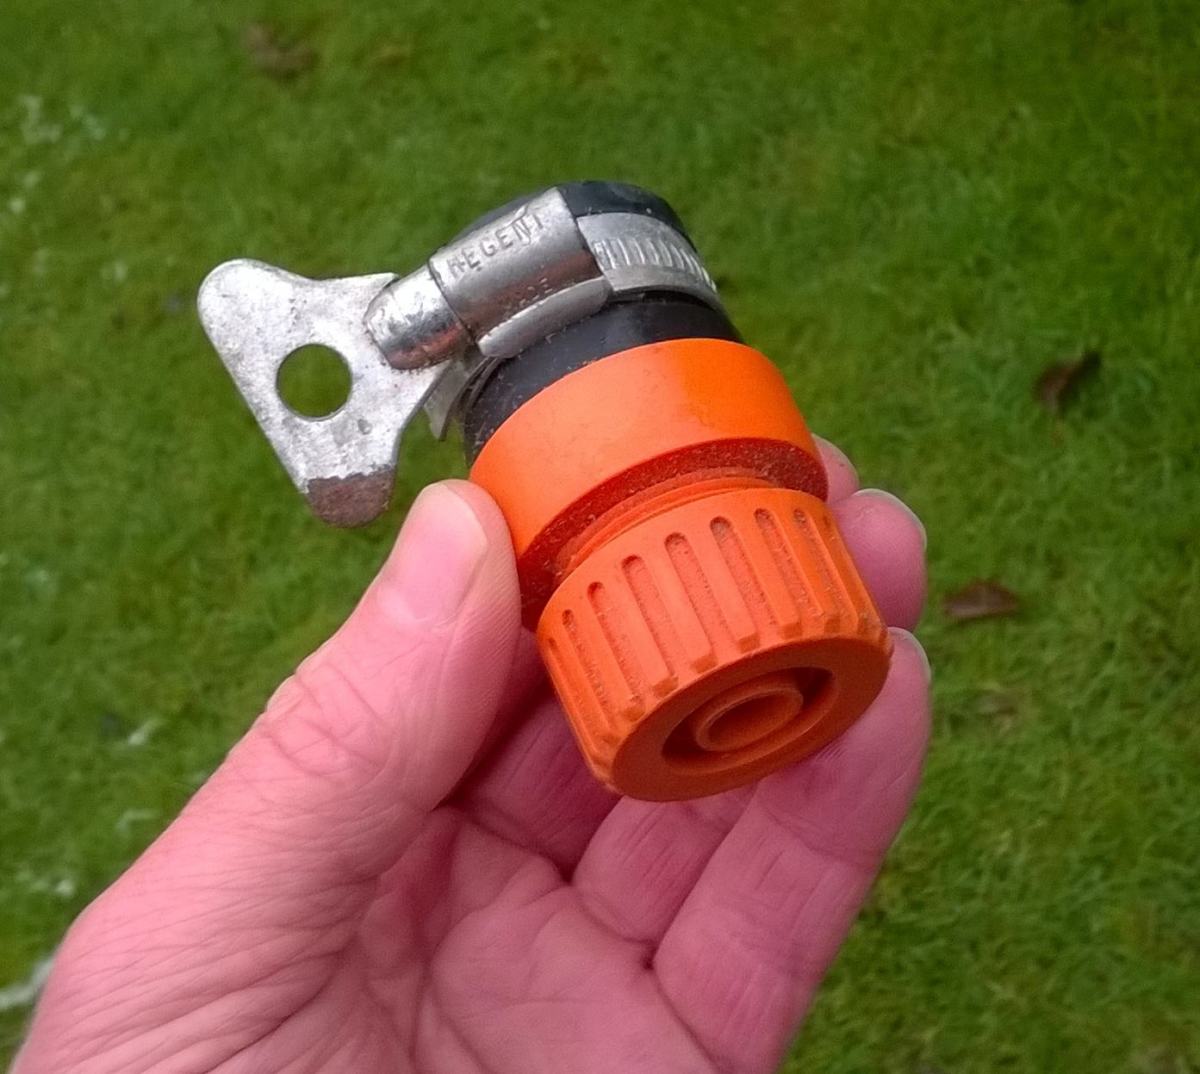 This fitting has to be loosened and removed from the tap if someone needs to use it. The fitting is held in place on the hose by the knurled ring.